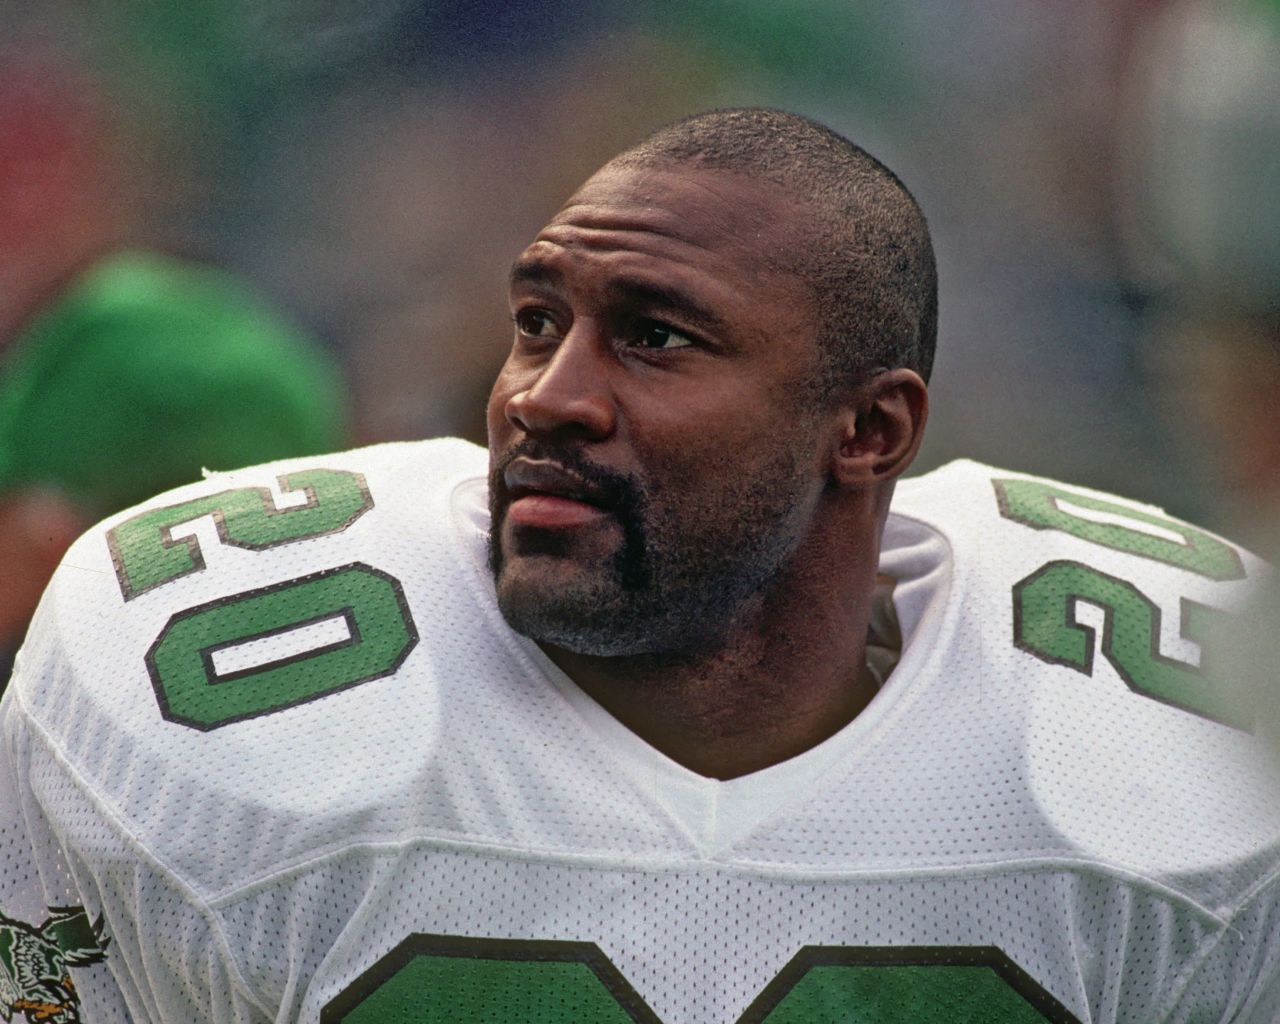 Andre Waters spent most of his 12 seasons with the Philadelphia Eagles before his suicide at age 44.